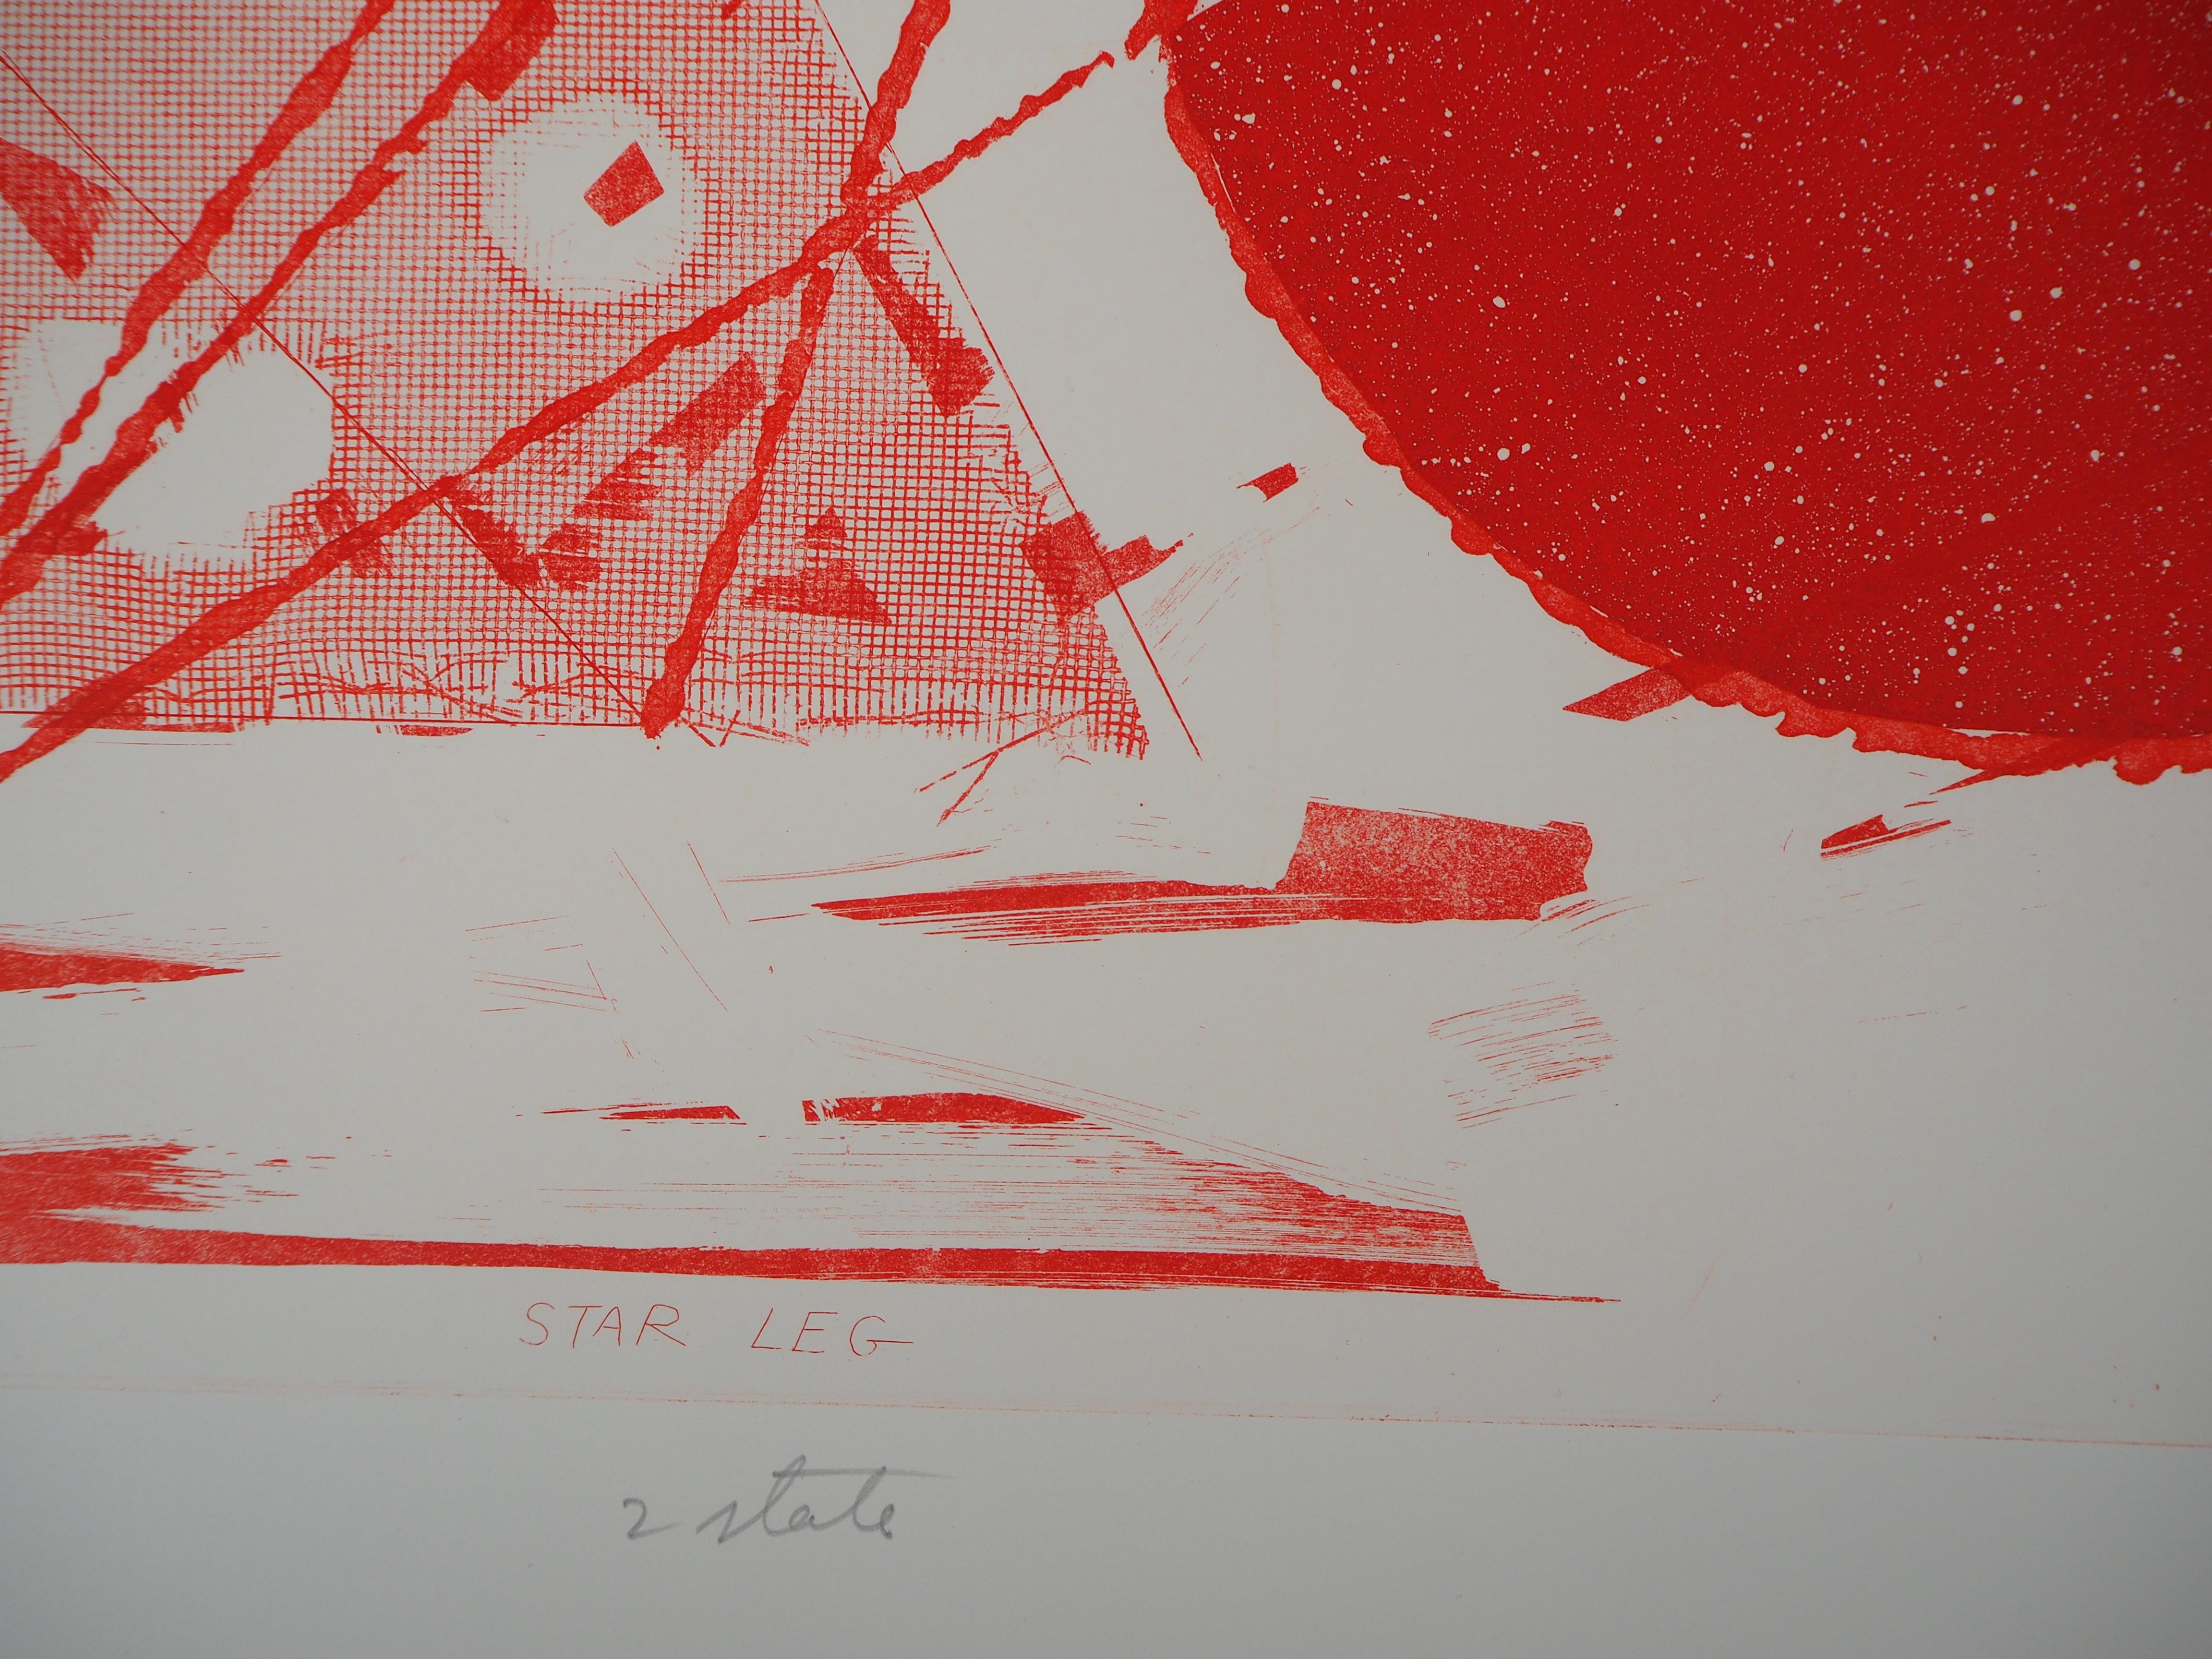 Symbols, Star Leg - Original Etching and Aquatint, Handsigned  - Gray Abstract Print by James Rosenquist